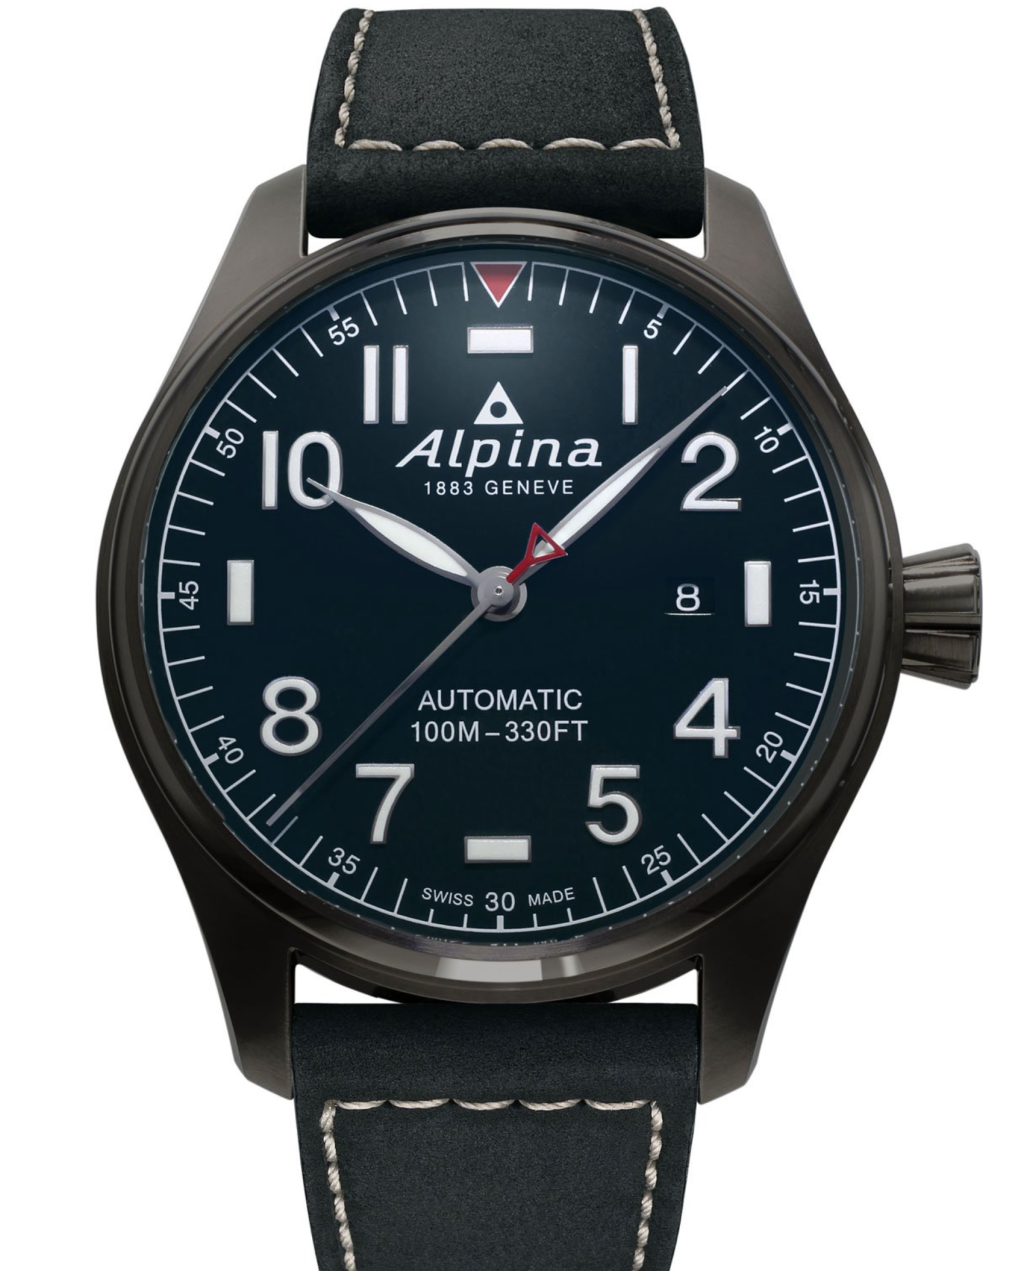 A week on the wrist with the Alpina Startimer